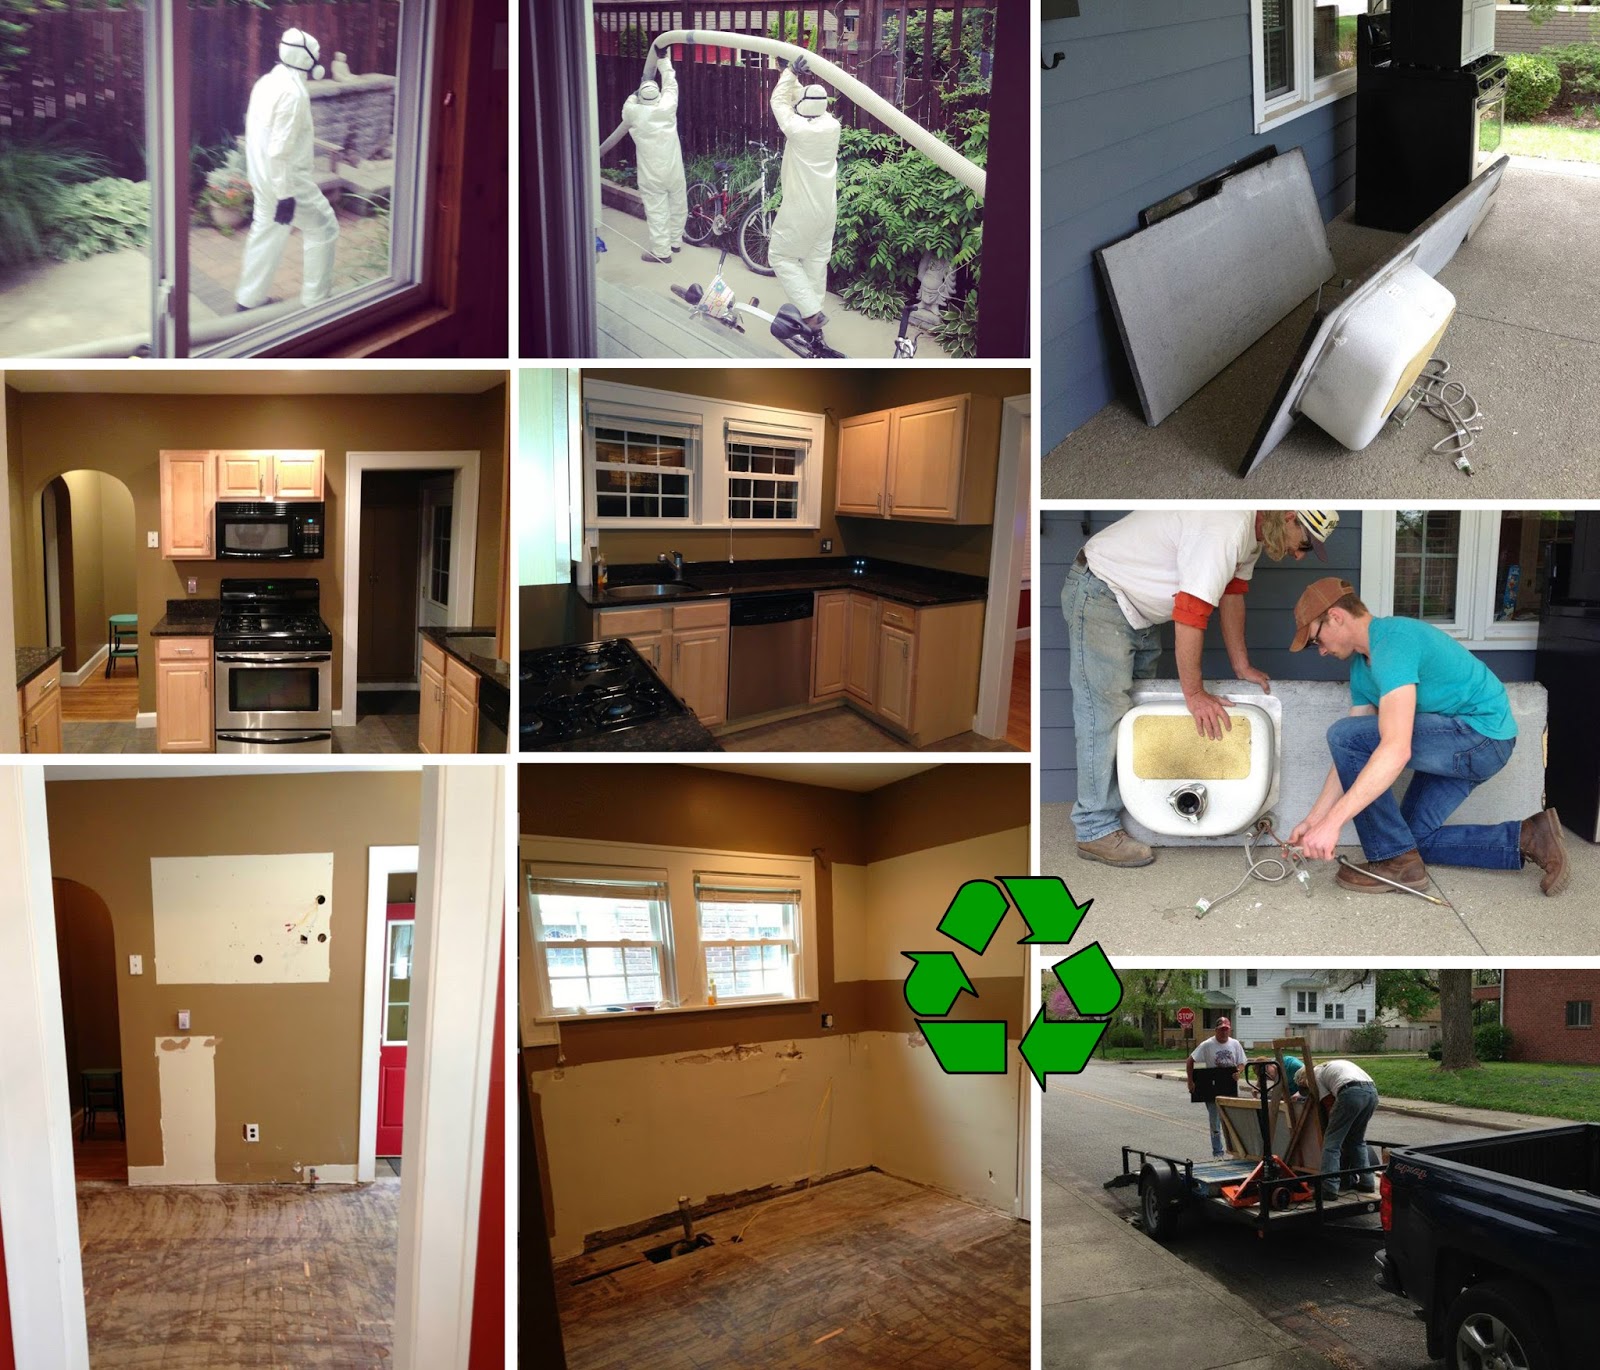 Main house remodel: asbestos removal and repurposing of existing kitchen.